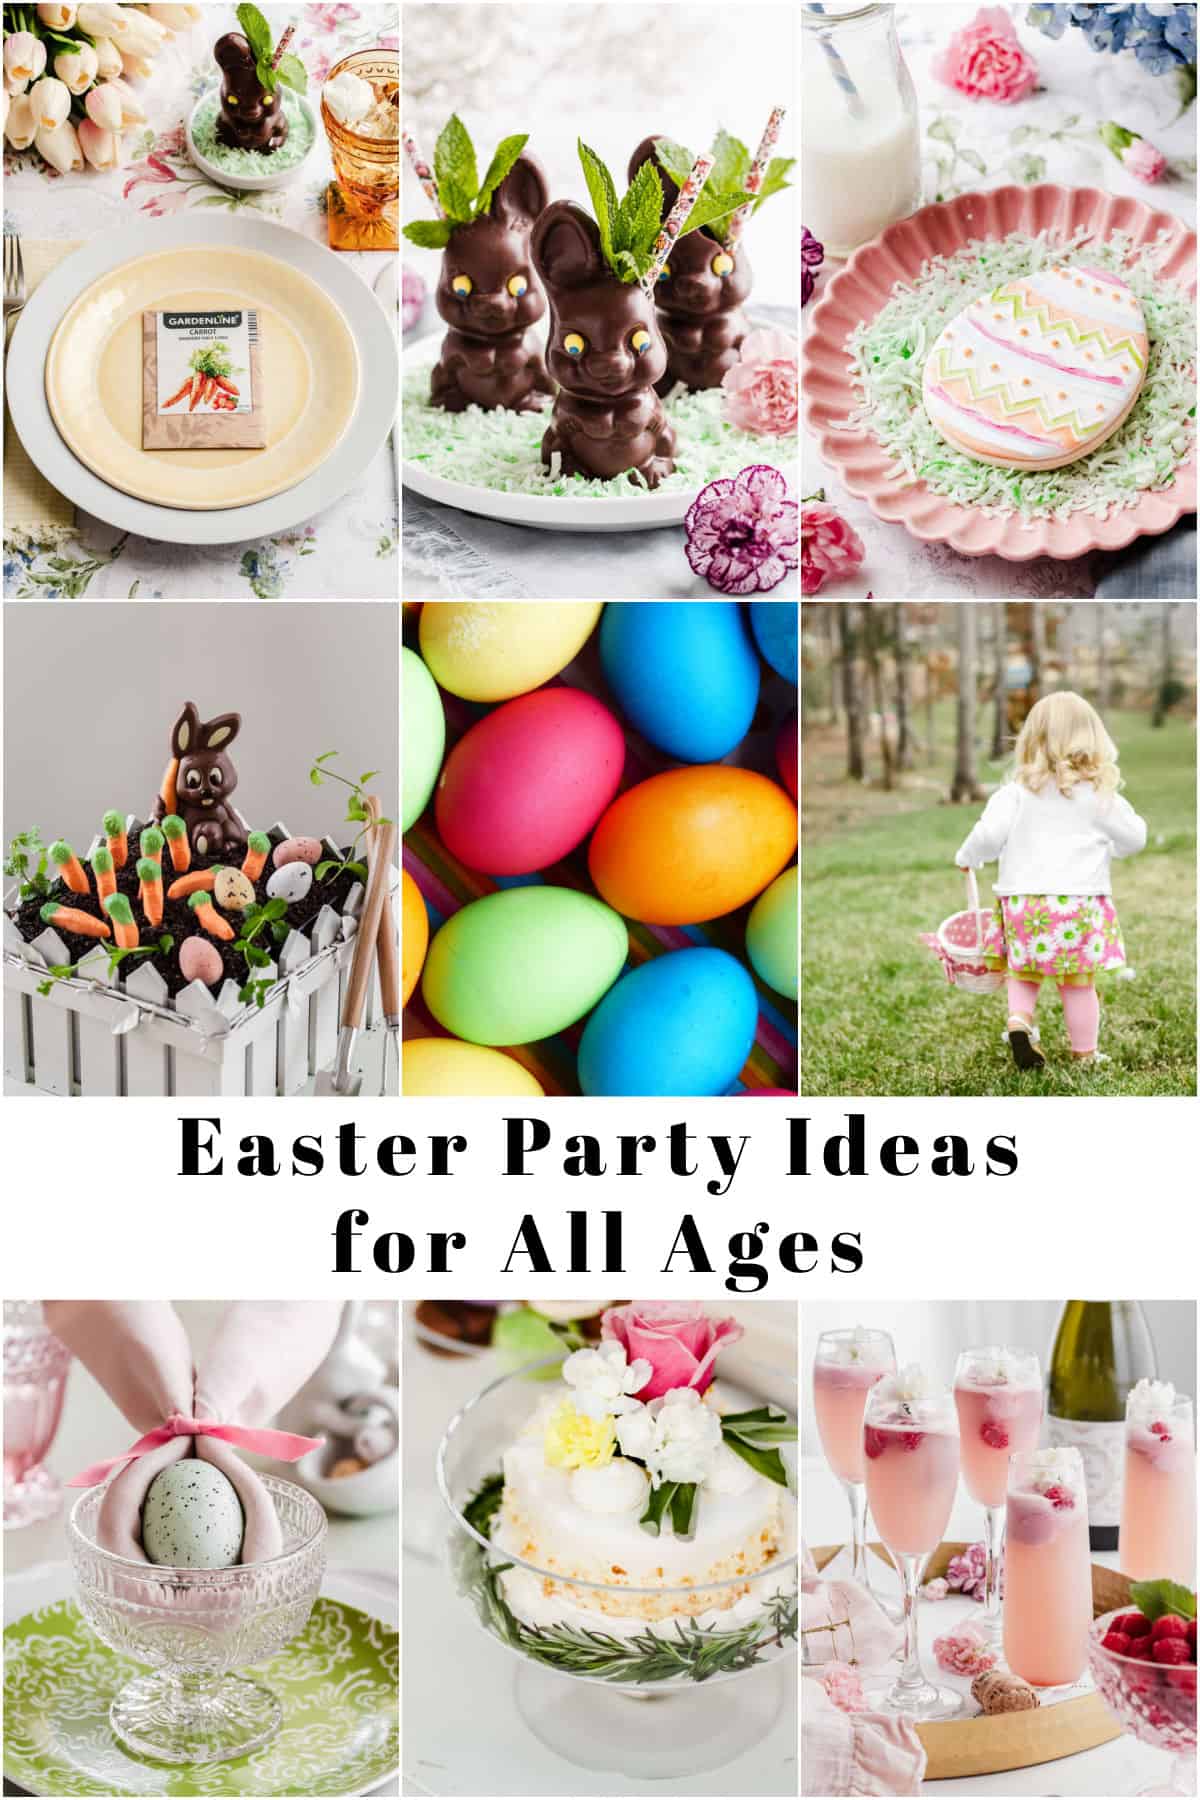 photo collage with text that says Easter party ideas for all ages.